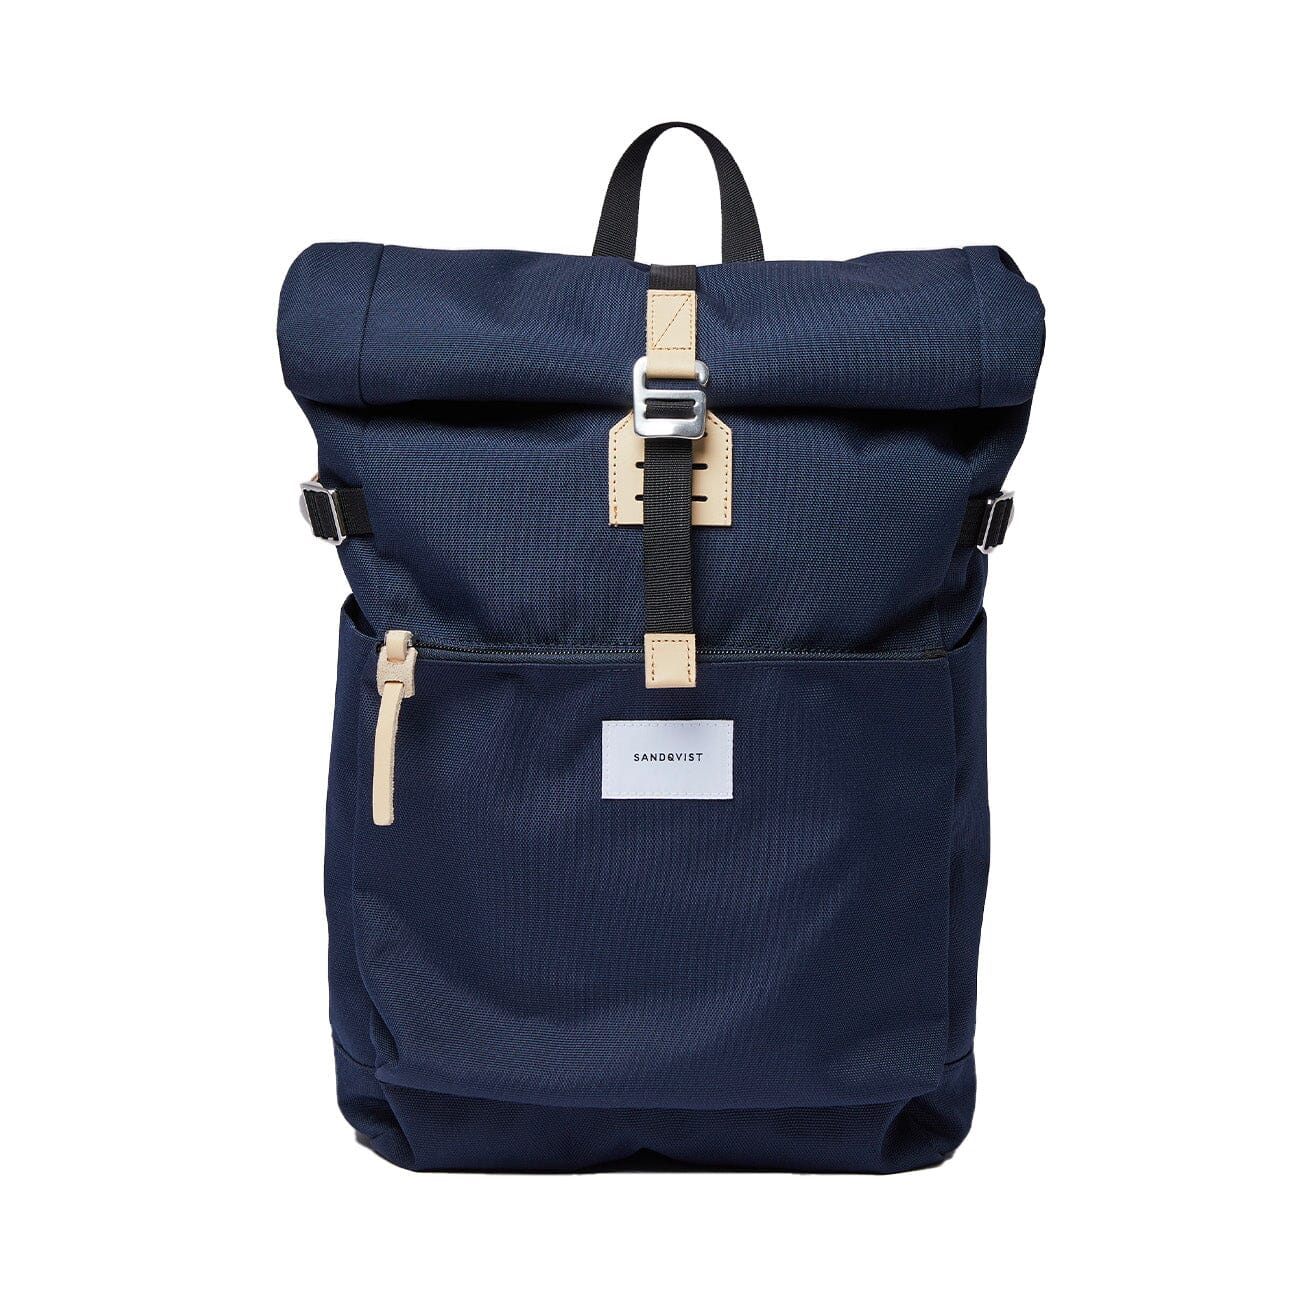 eco friendly urban roll top backpack ilon sandqvist navy color front view